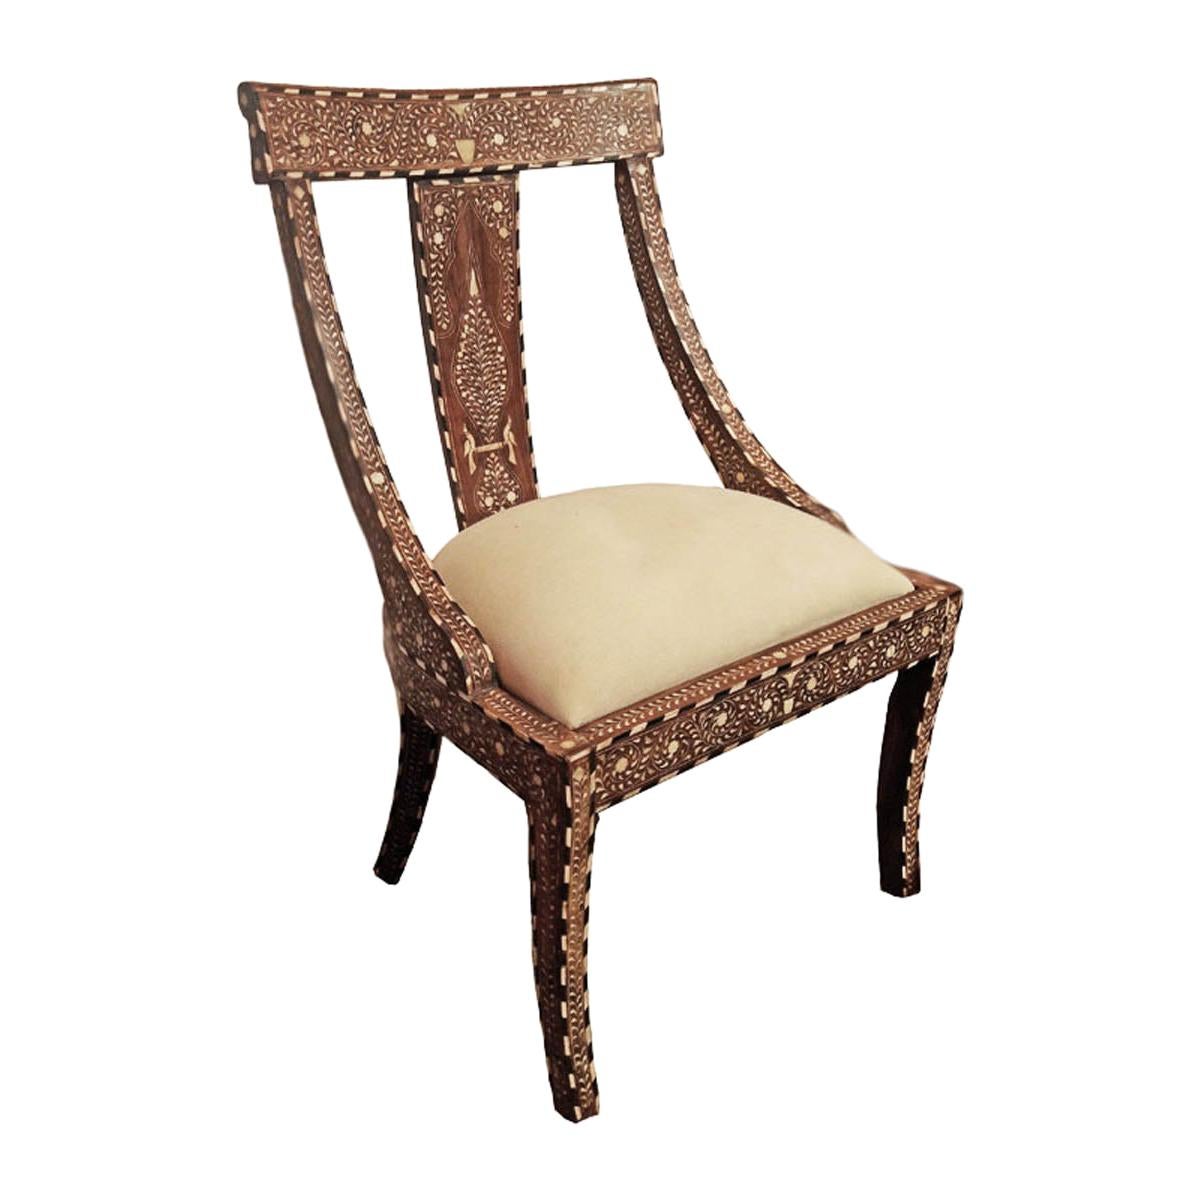 Bone-Inlaid Teak Chair from India, Late 20th Century